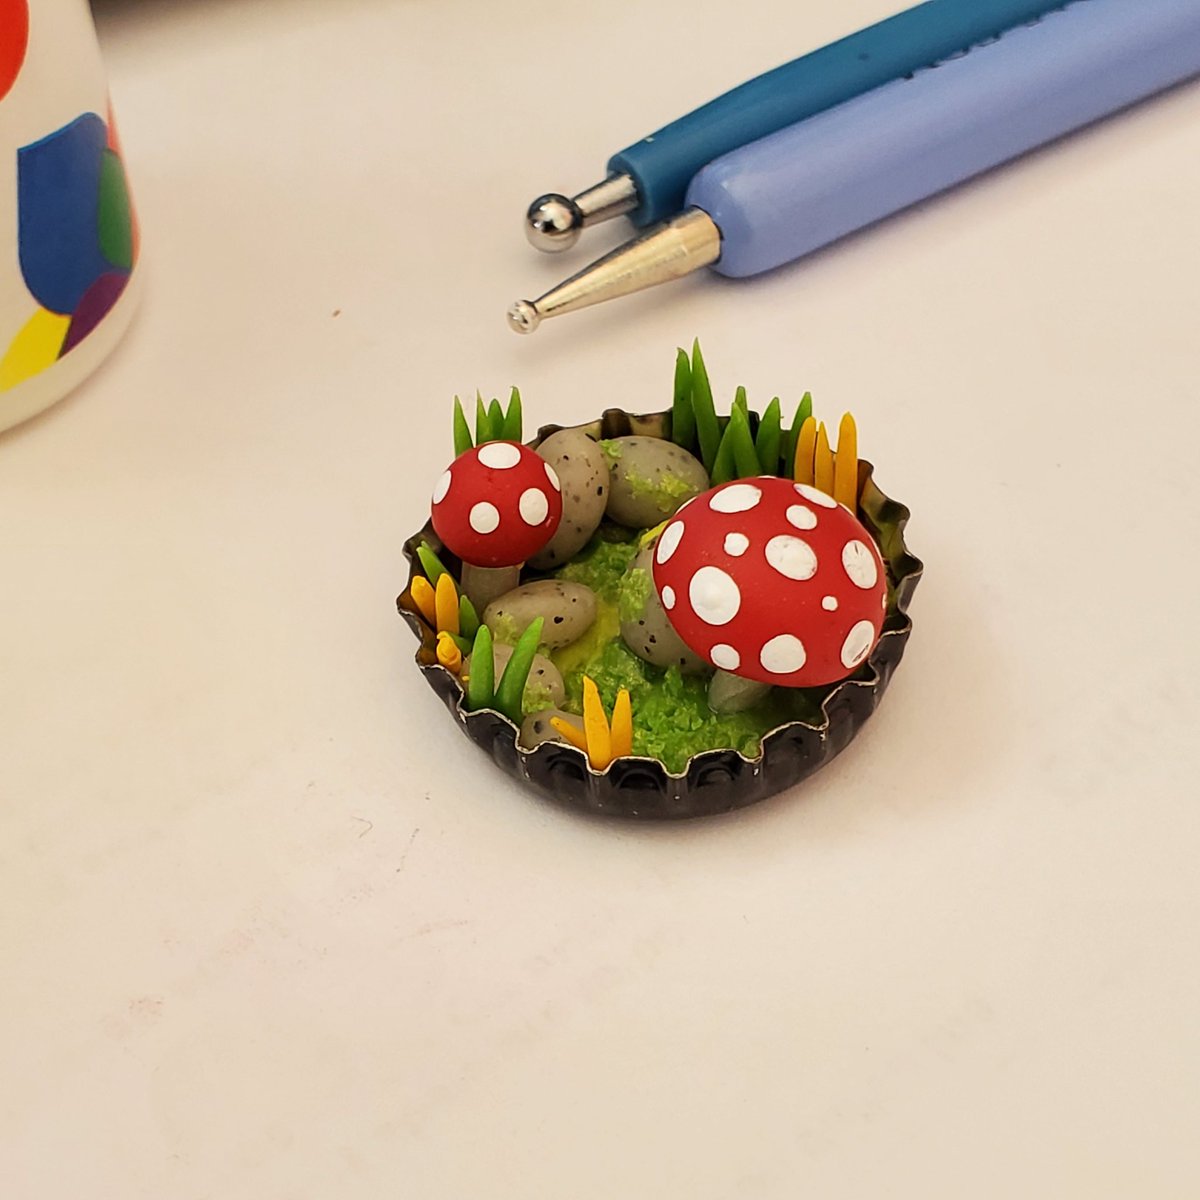 Once it's cool enough to touch, use a dotting tool or a toothpick to paint white dots on the mushroom. Acrylic paint is fine.